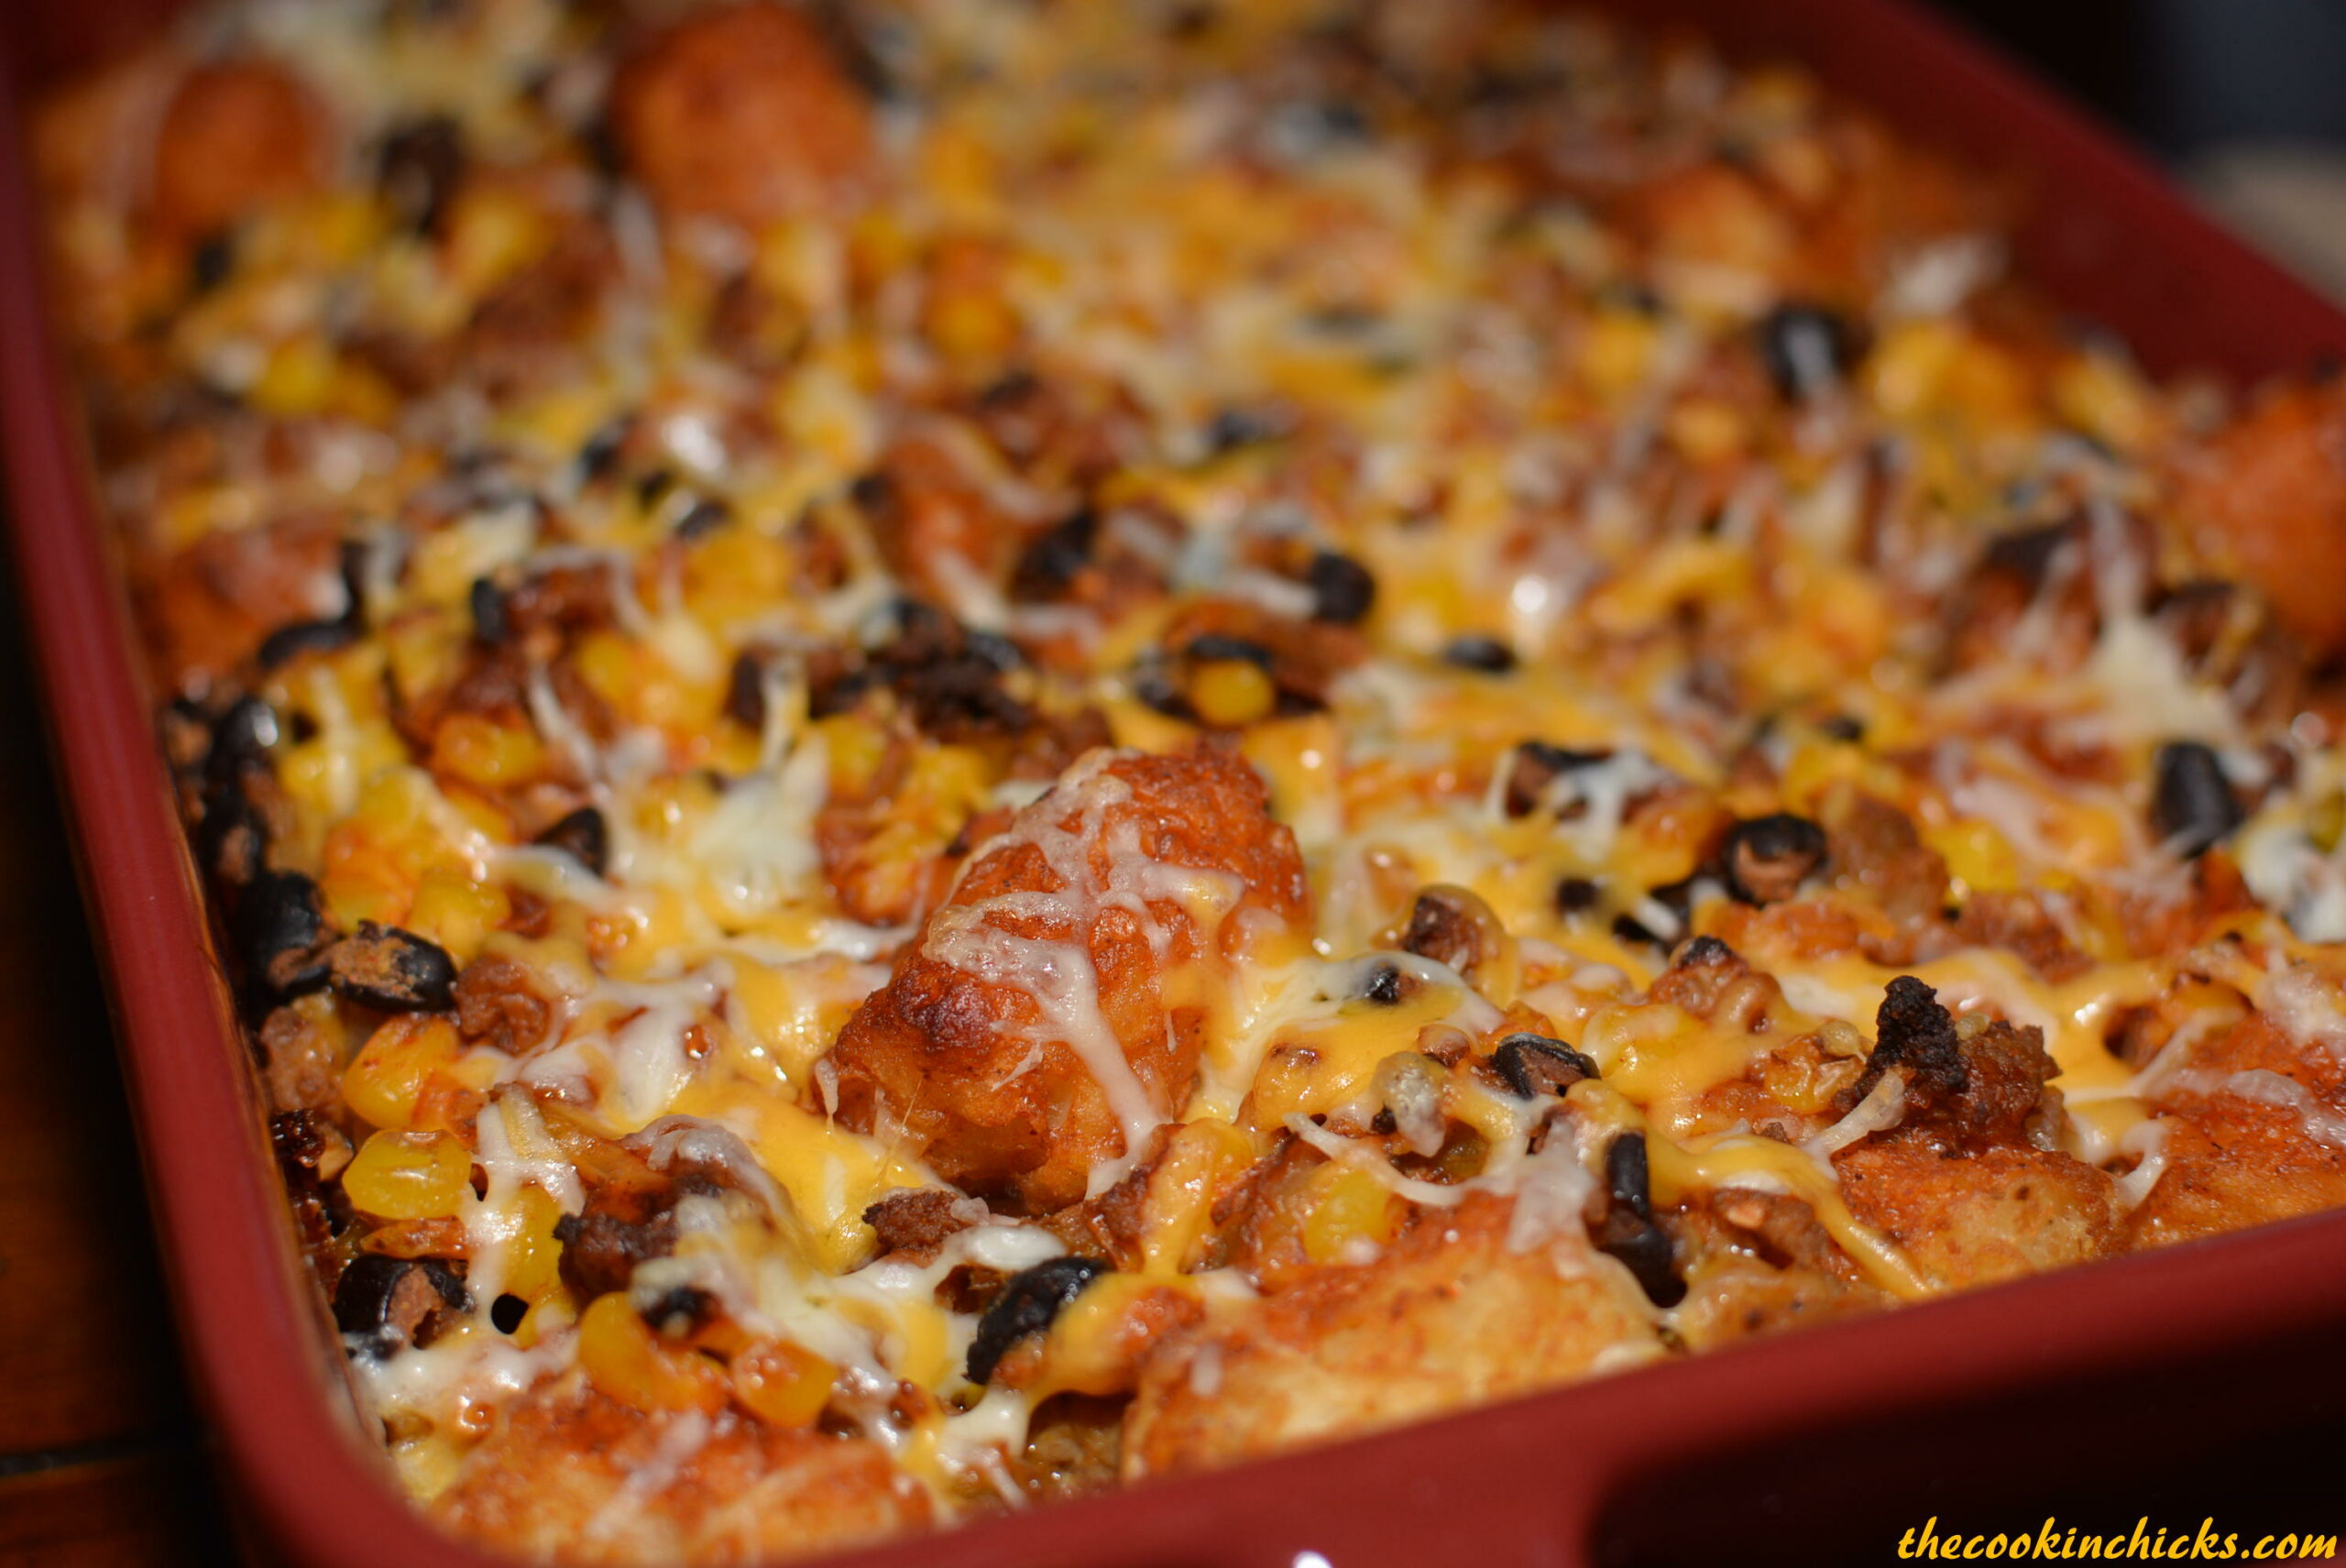 a taco flavored casserole with tater tots and black beans.